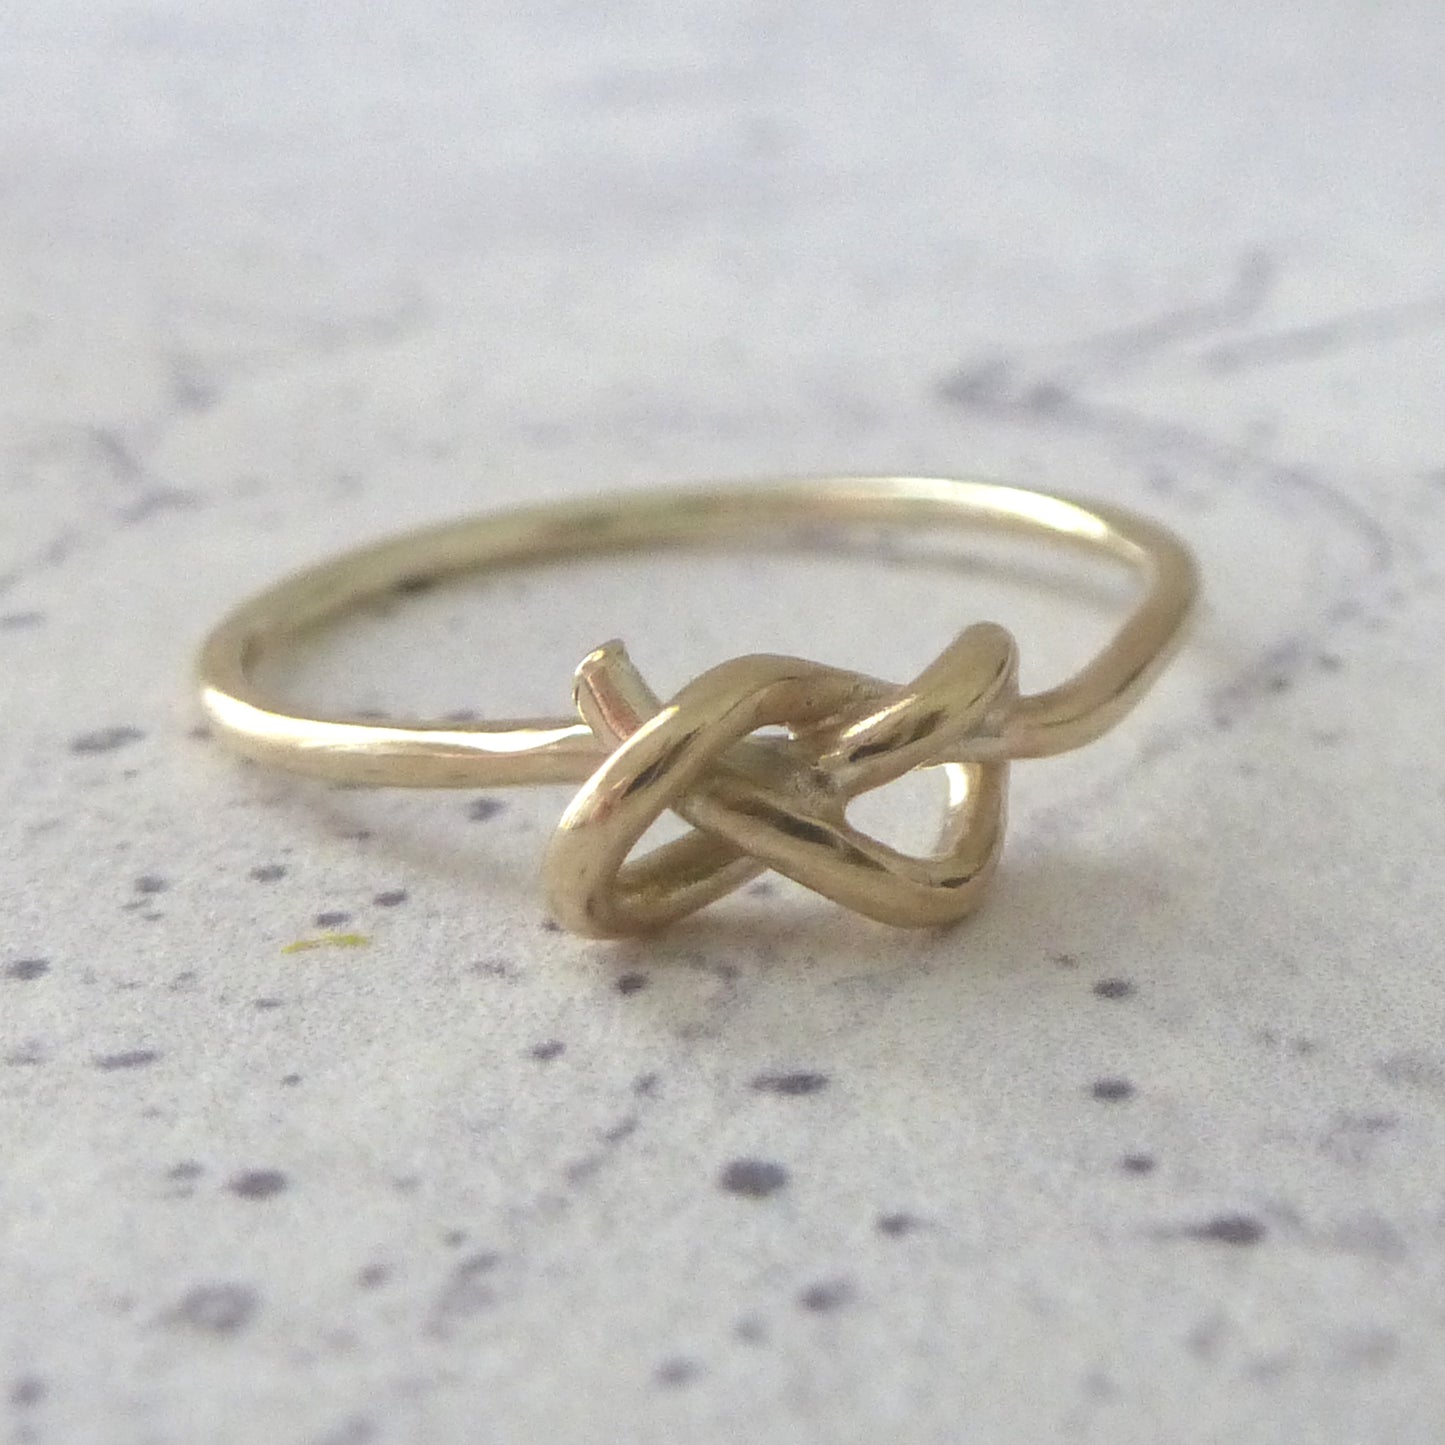 9ct yellow gold ring with knot, slim band